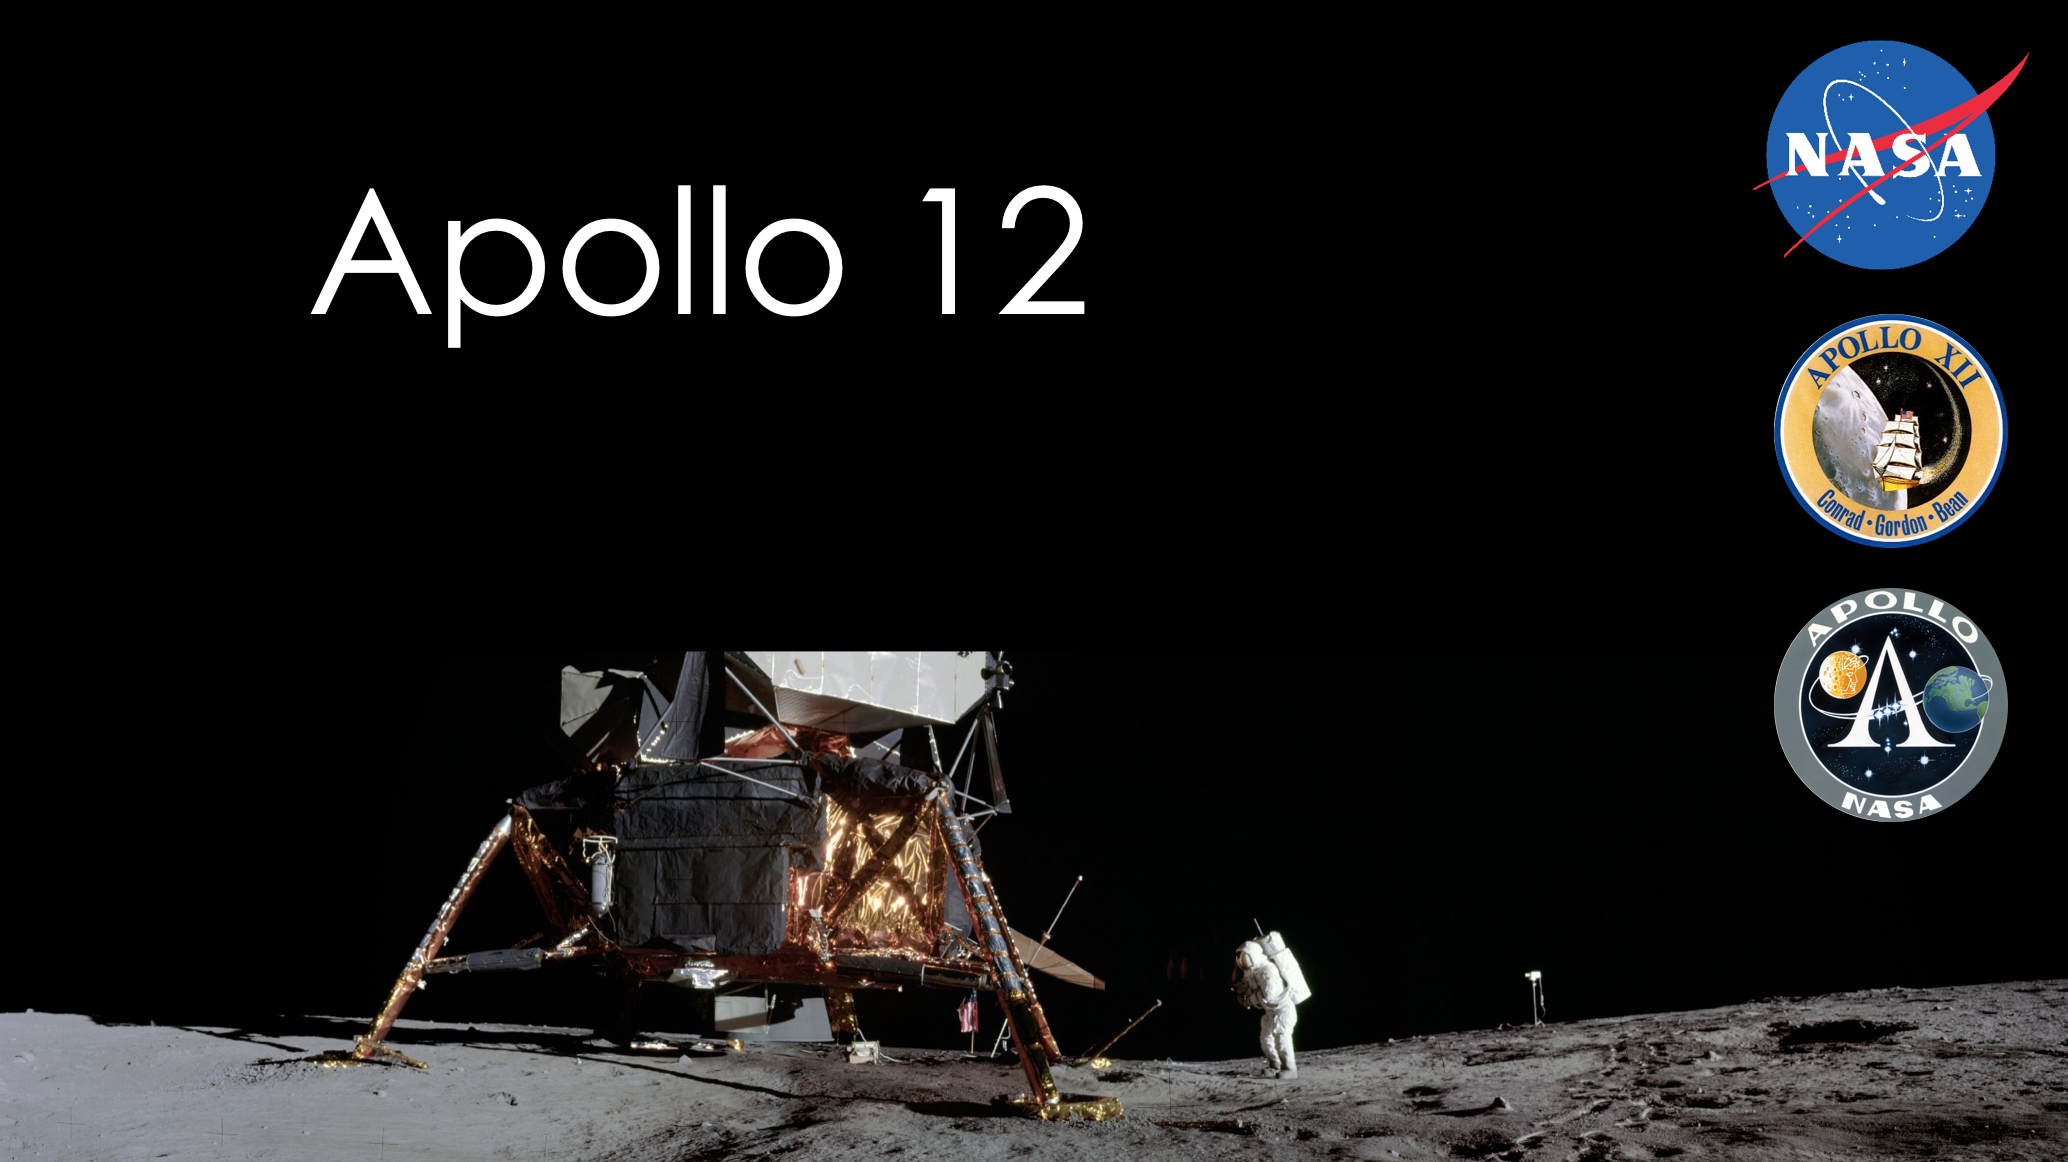 Cover slide with image of spacecraft on the lunar surface under a black sky and NASA logos. Text reads: "Apollo 12"